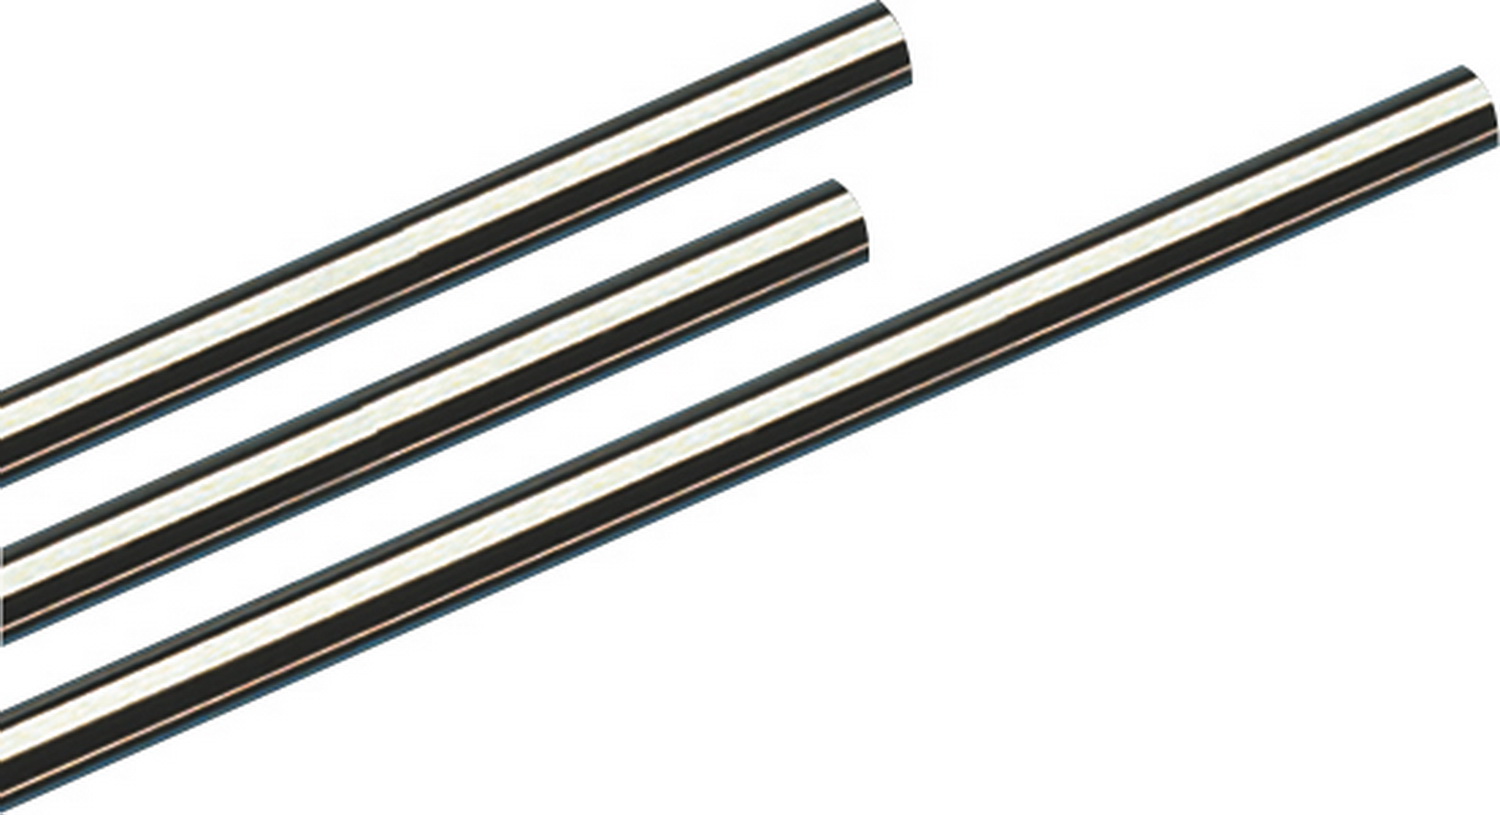 2.25" T-304 Stainless Steel Straight Tubing. 30325